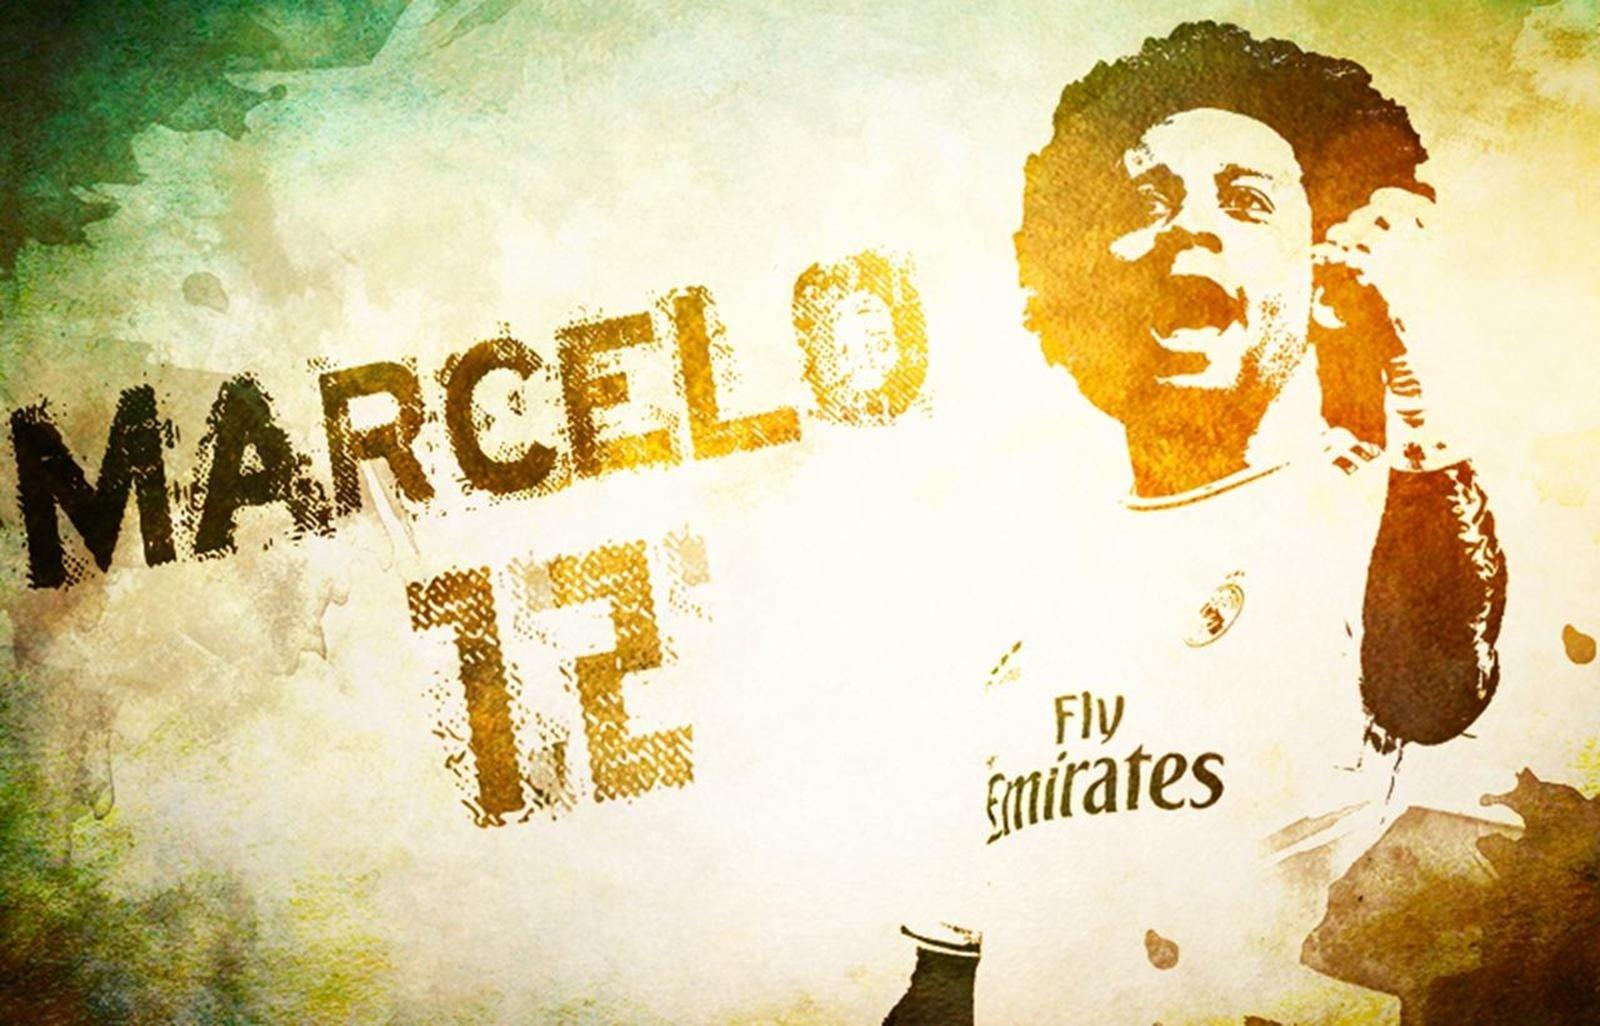 Marcelo Vieira Real Madrid 2021 Wallpapers